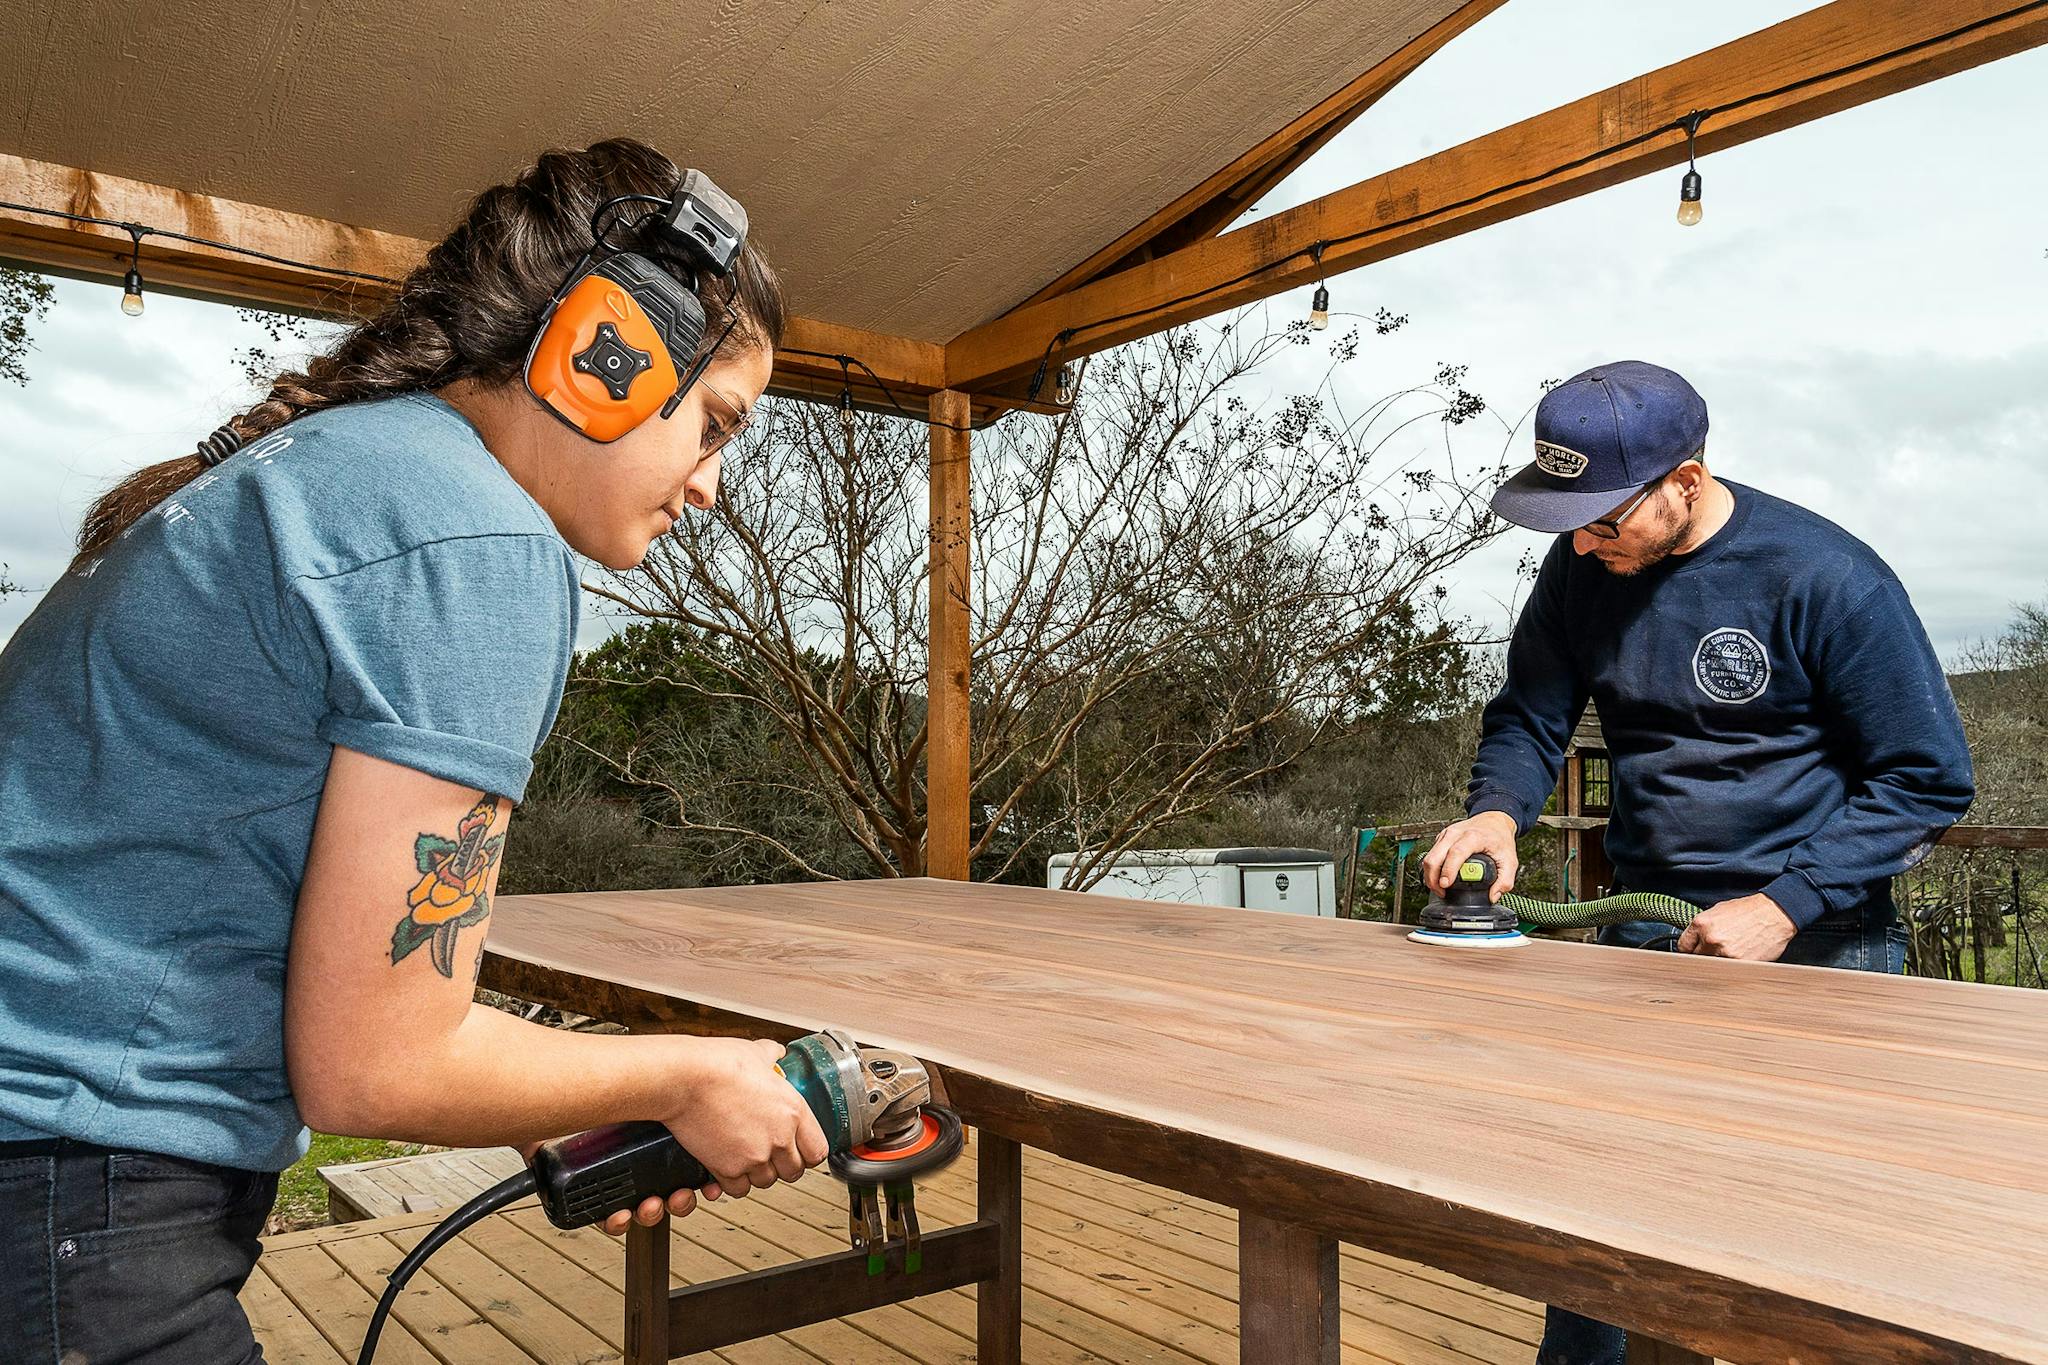 Morley (right) and his apprentice Amanda Russell sand down a book-matched live edge walnut table top at his studio in Wimberly on March 8, 2021.